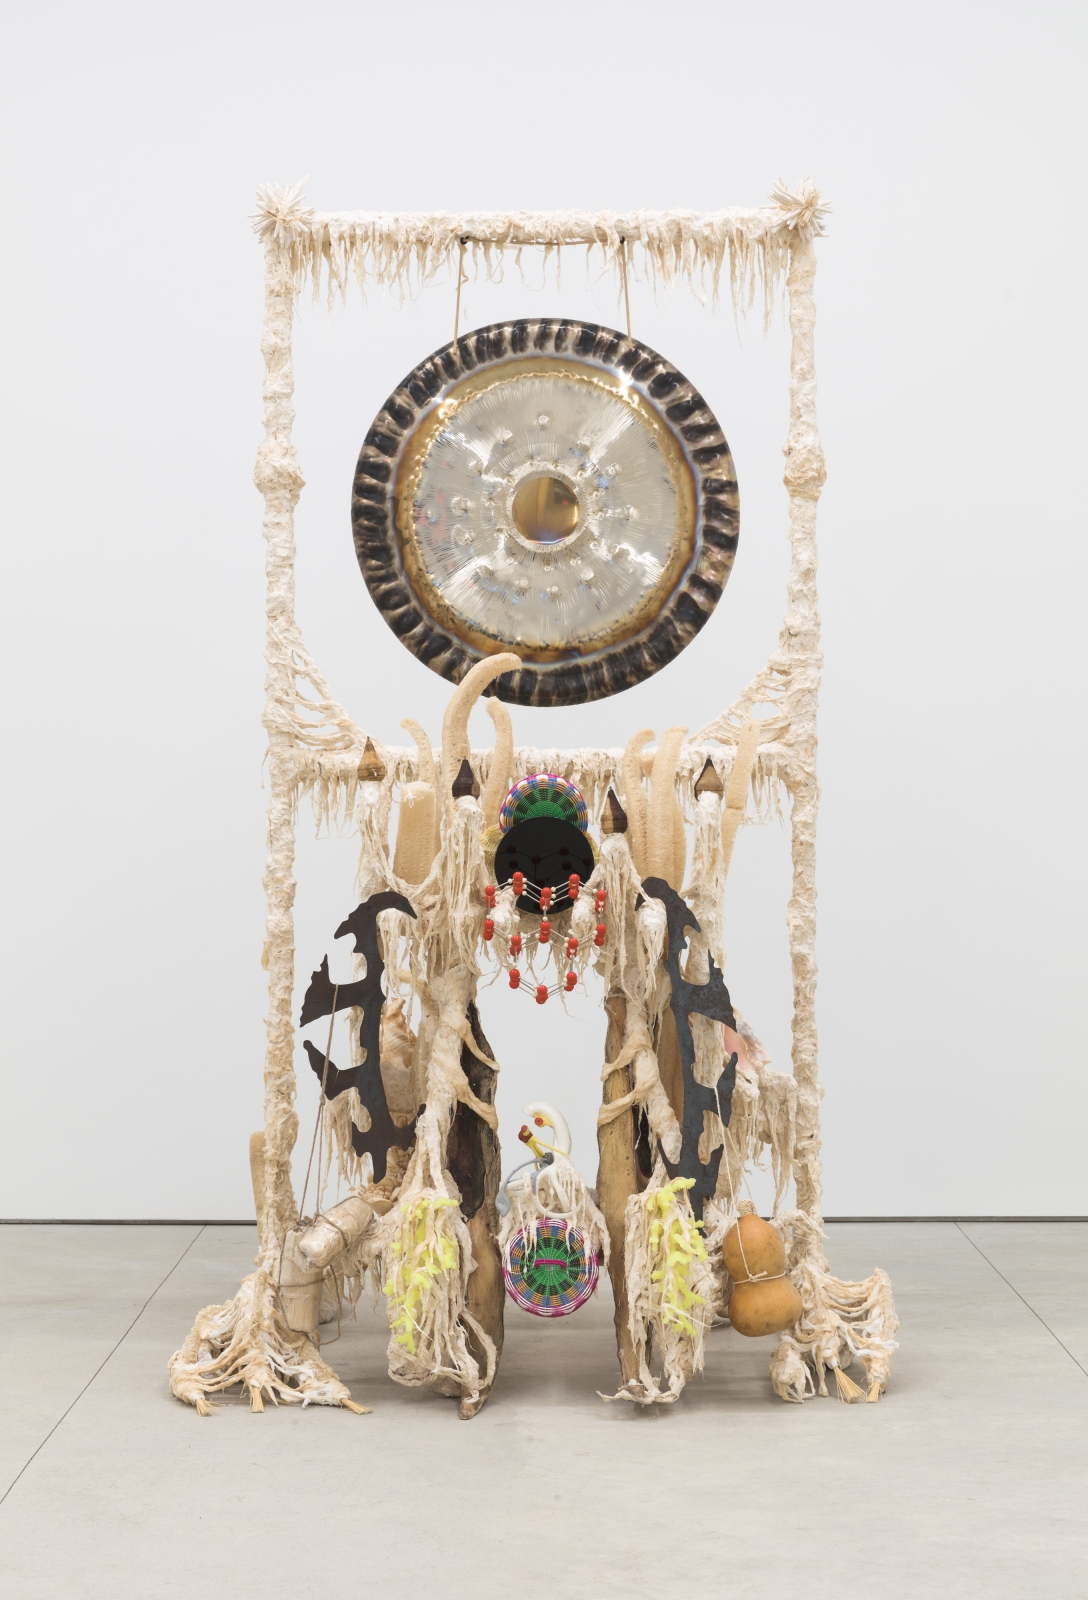 Guadalupe Maravilla
Disease Thrower #10, 2020
gong, steel, wood, cotton, glue mixture, plastic, loofah, and objects collected from a ritual of retracing the artist&#39;s original migration route
96 x 57 x 63 ins.
243.8 x 144.8 x 160 cm